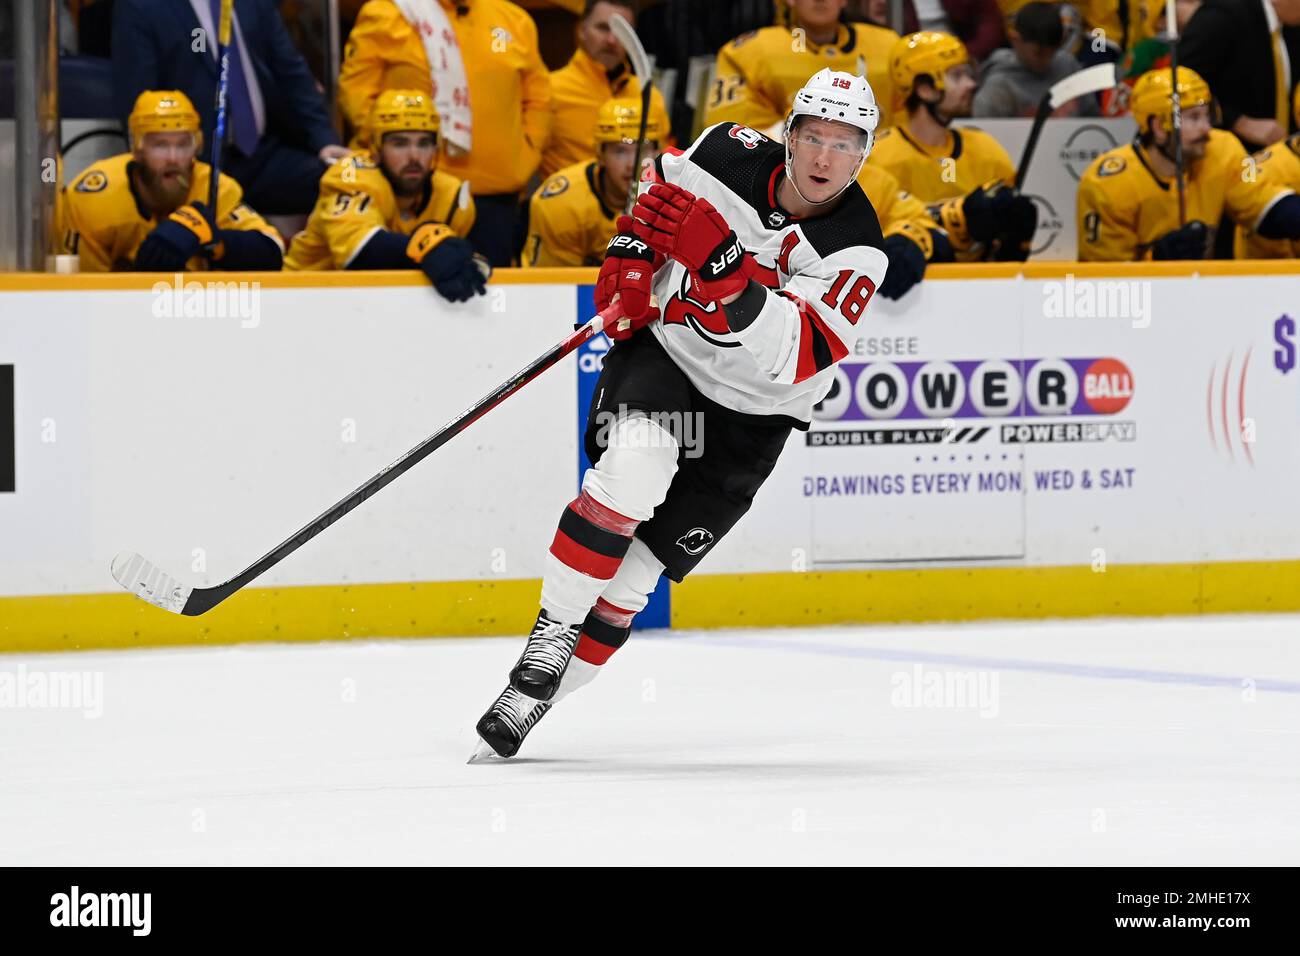 New Jersey Devils left wing Ondrej Palat during an NHL hockey game